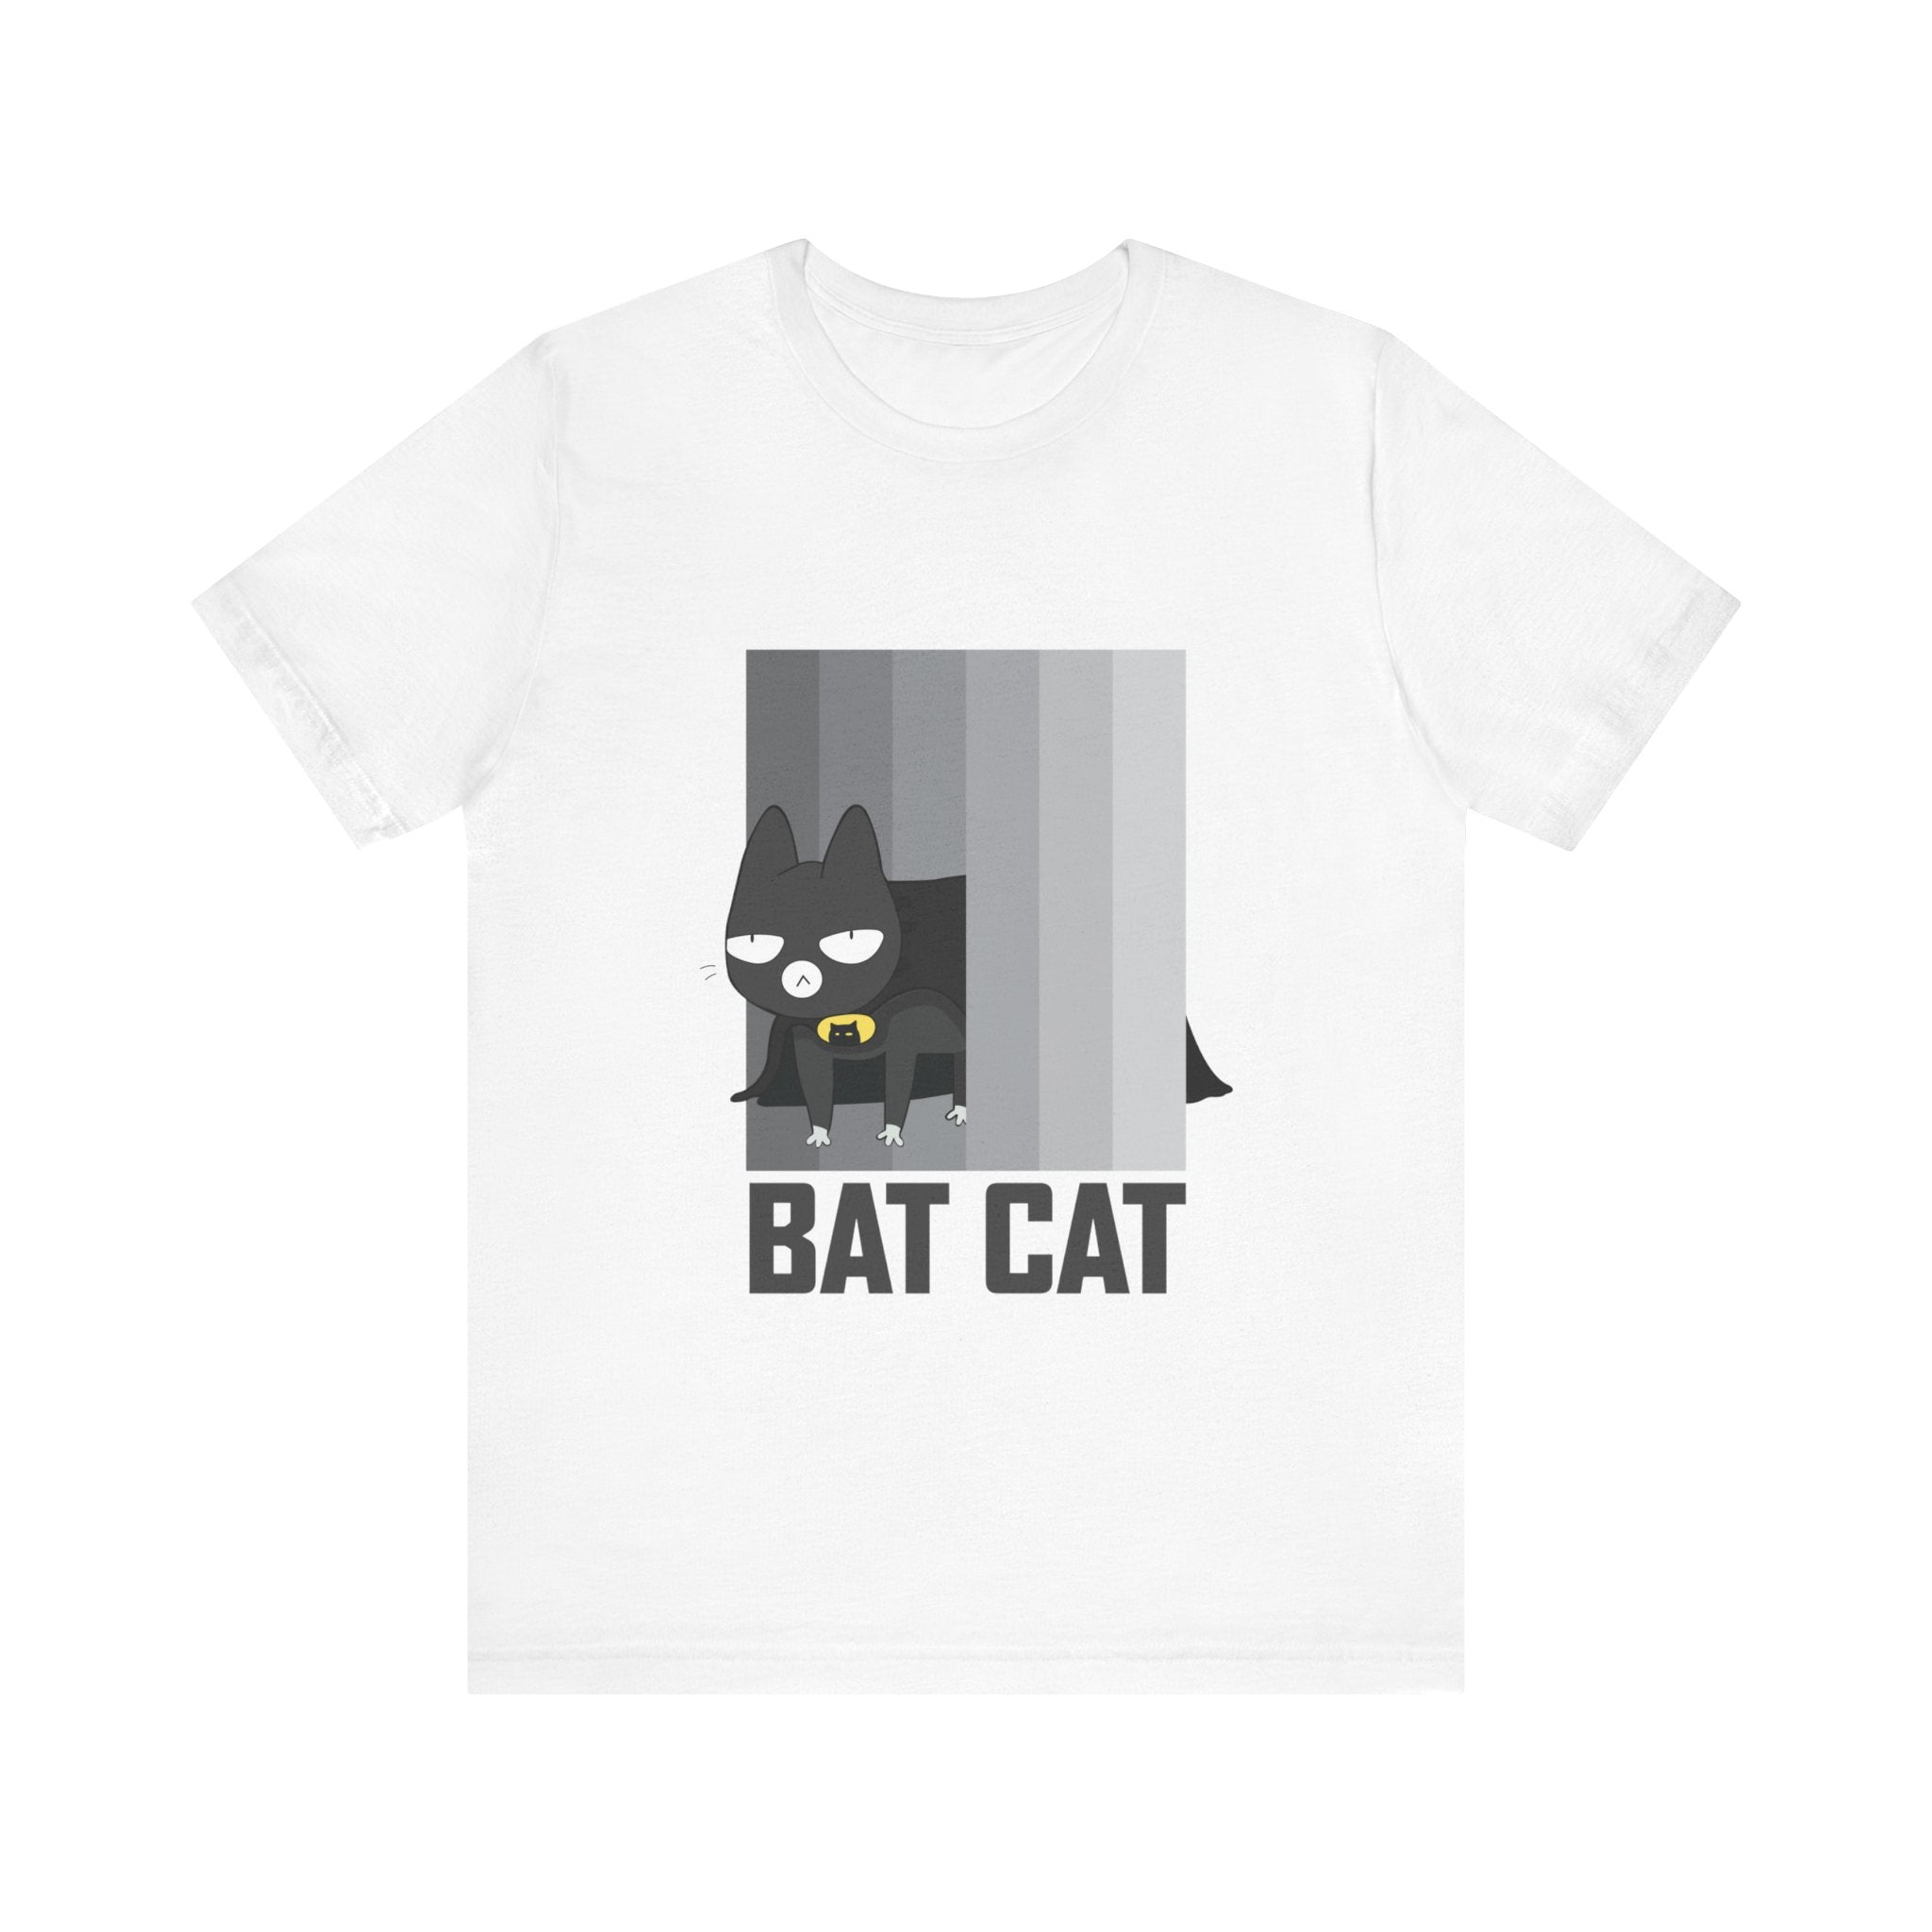 Unisex tee featuring a cartoon design of a black cat dressed as a superhero with the words "BATCAT T-Shirt" below.